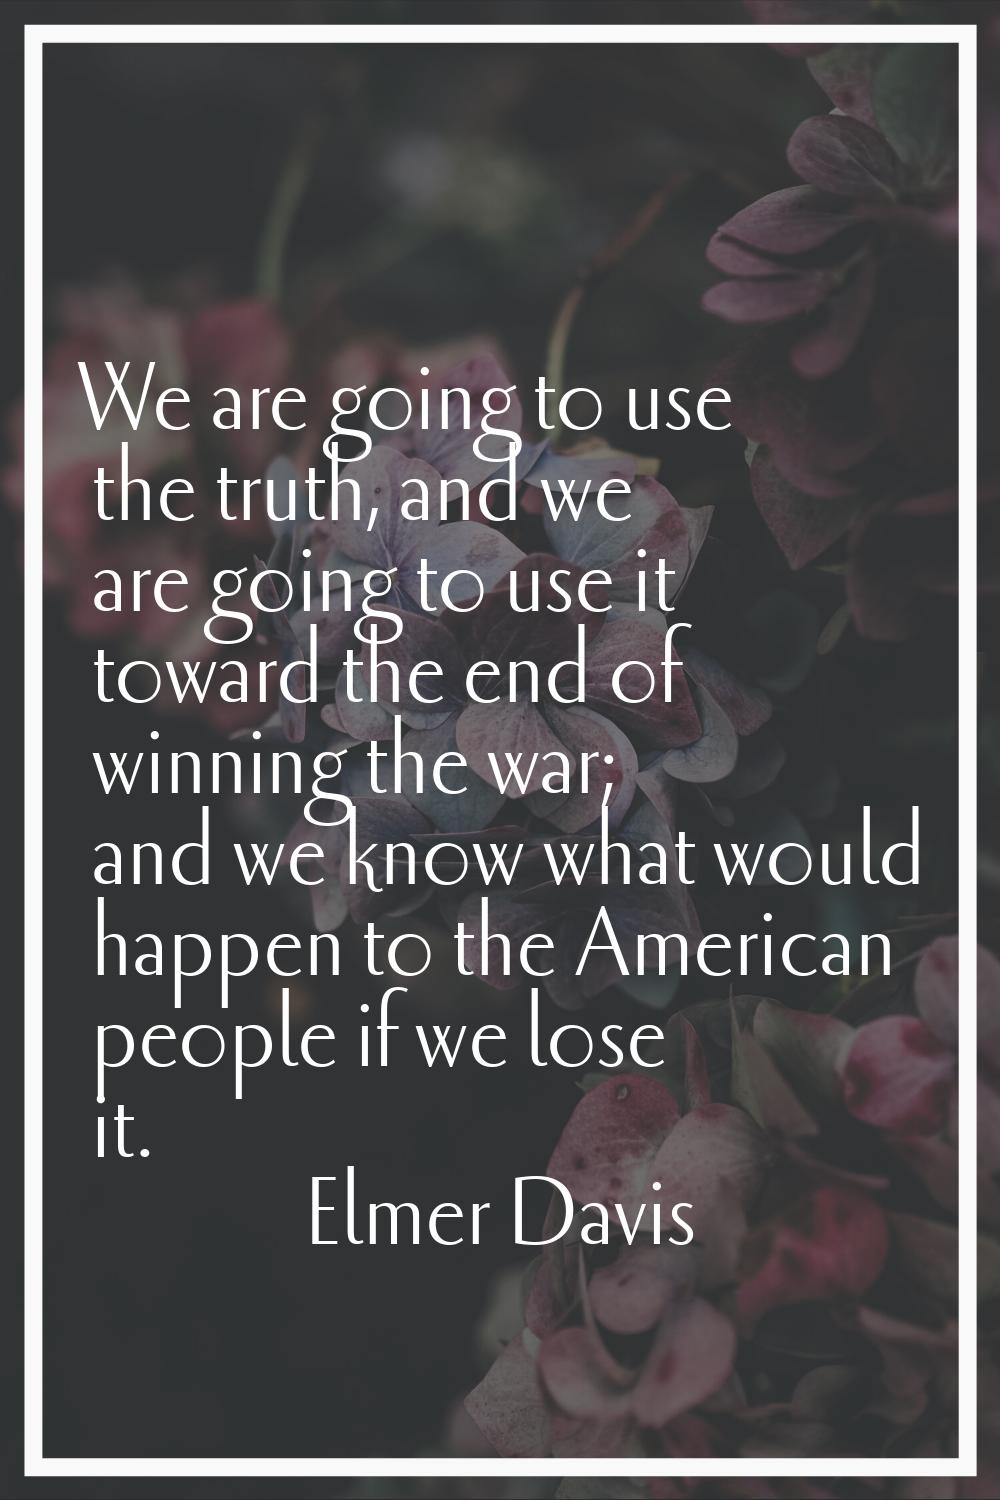 We are going to use the truth, and we are going to use it toward the end of winning the war; and we